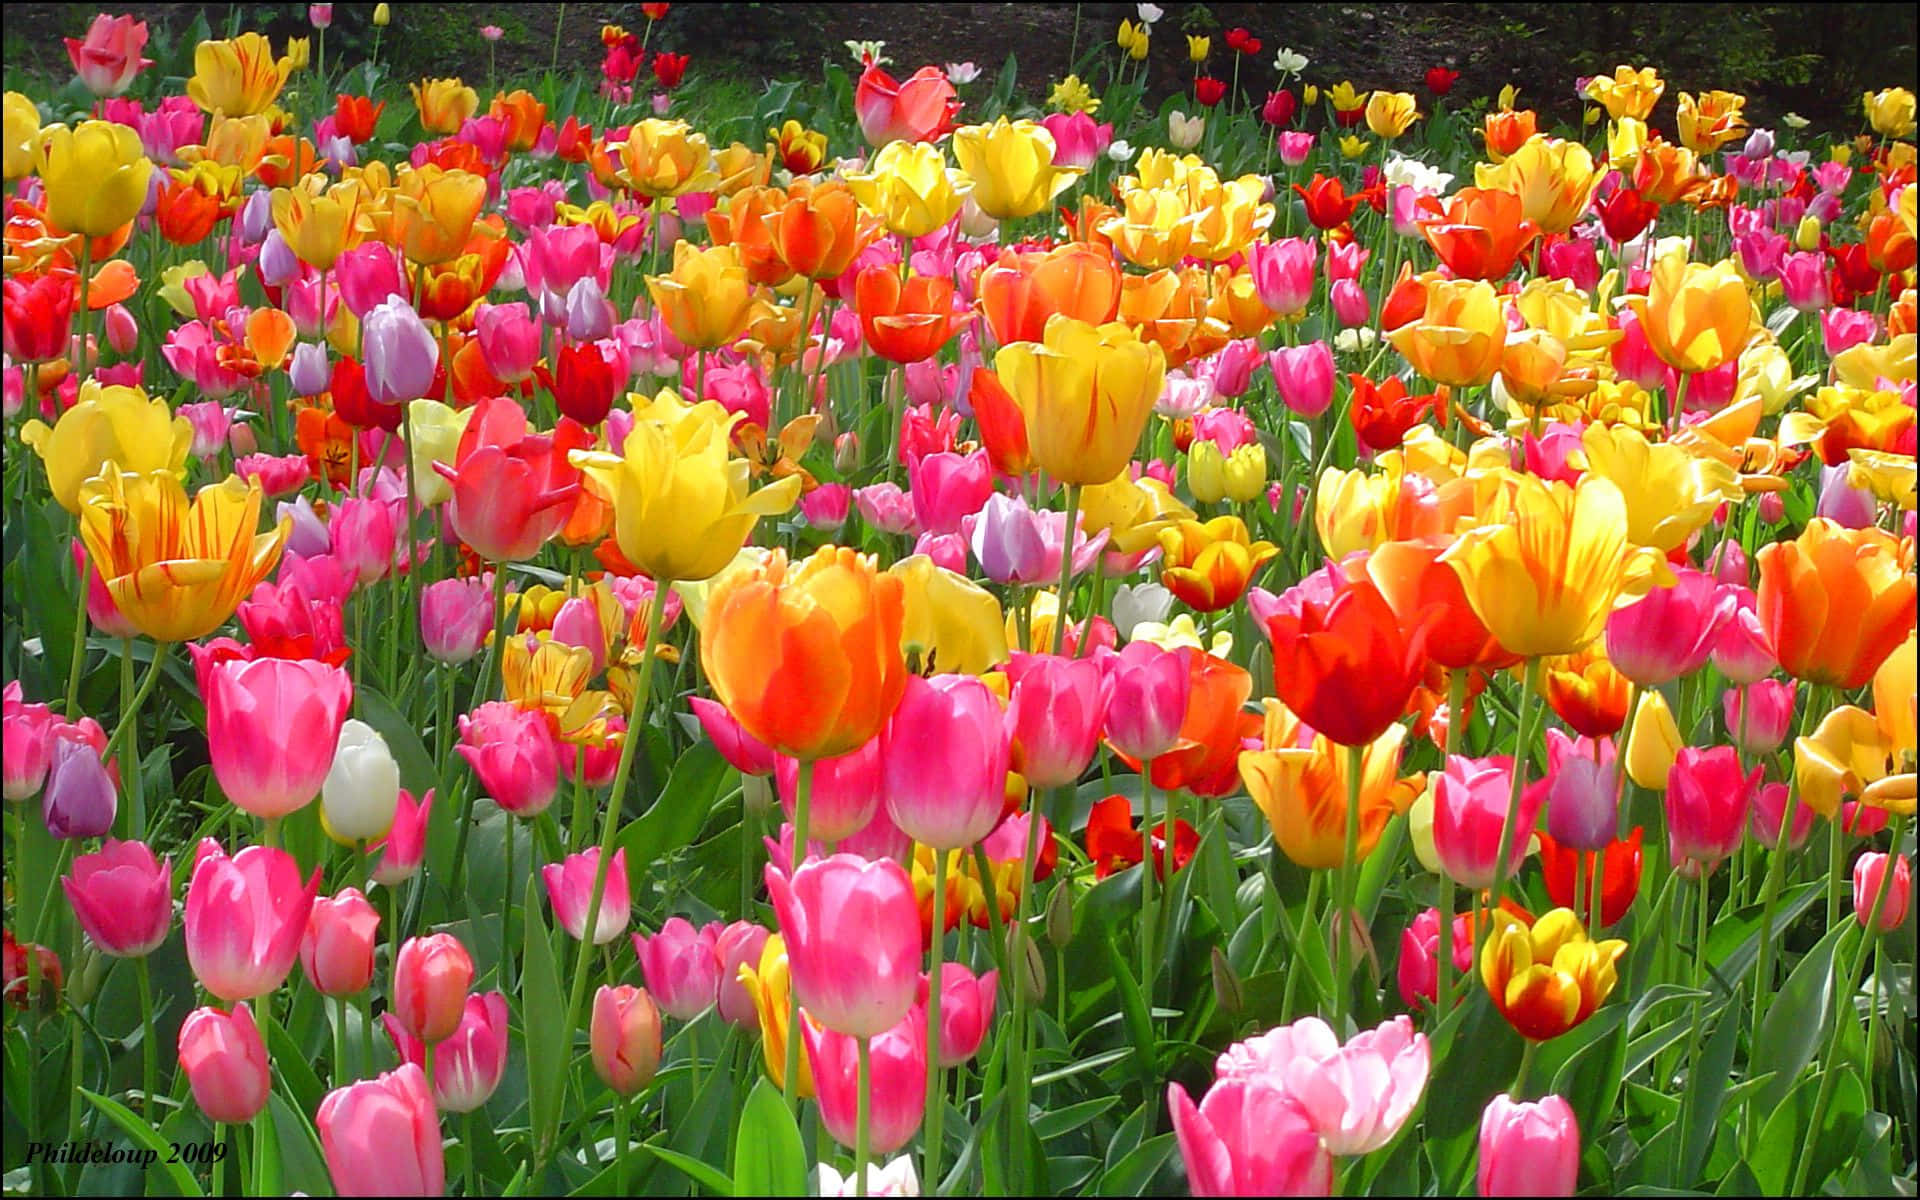 Discover the beauty of tulips